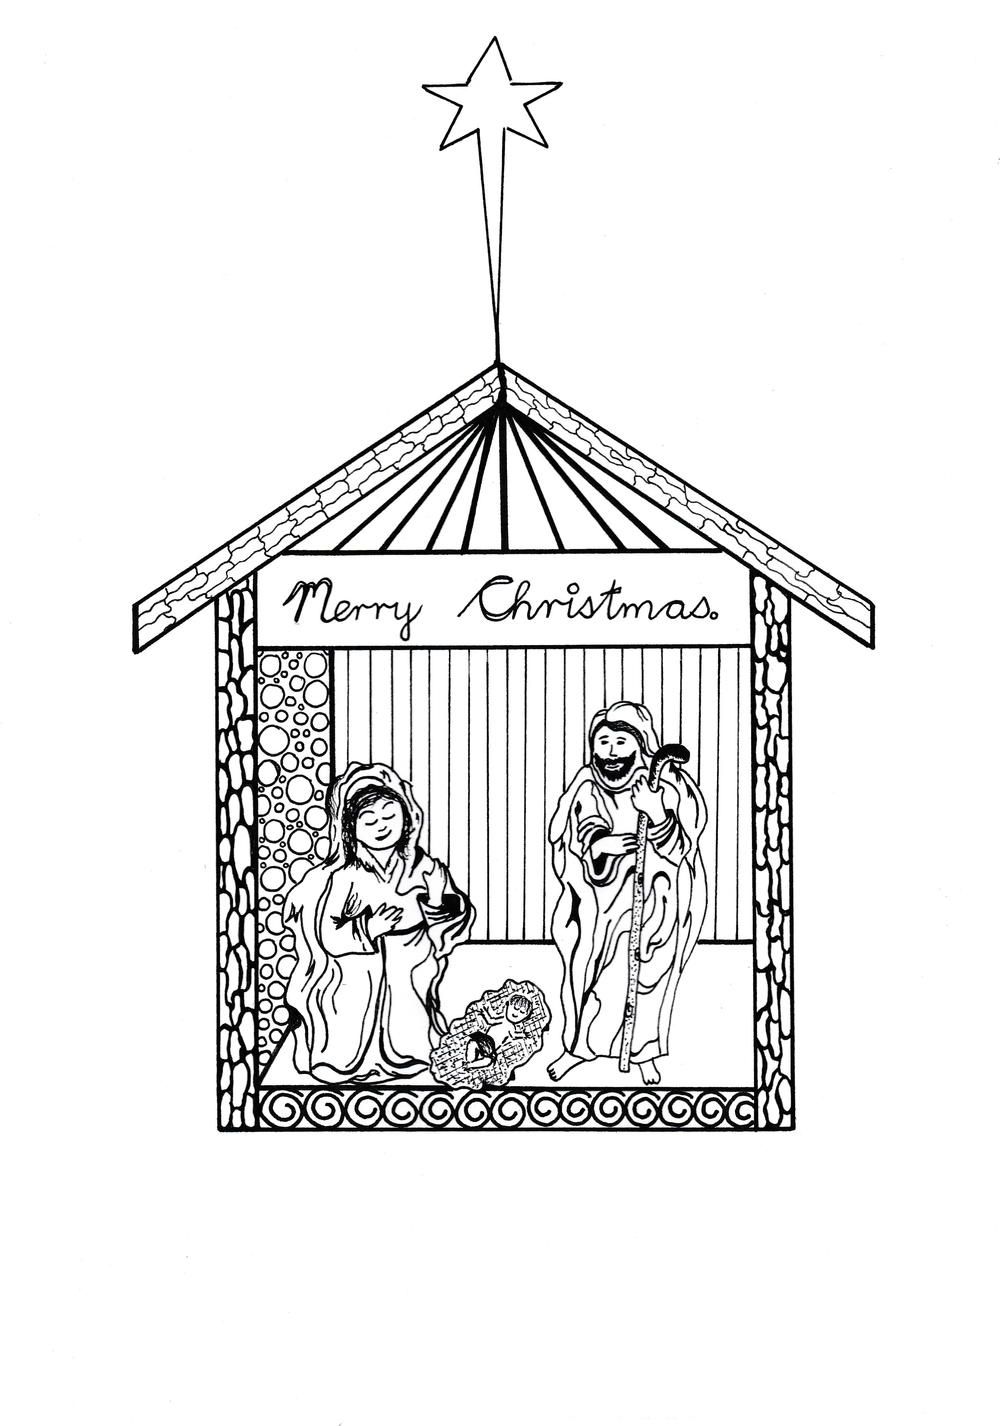 Free printable nativity scene coloring pages nativity coloring pages nativity scene silhouette christmas coloring pages